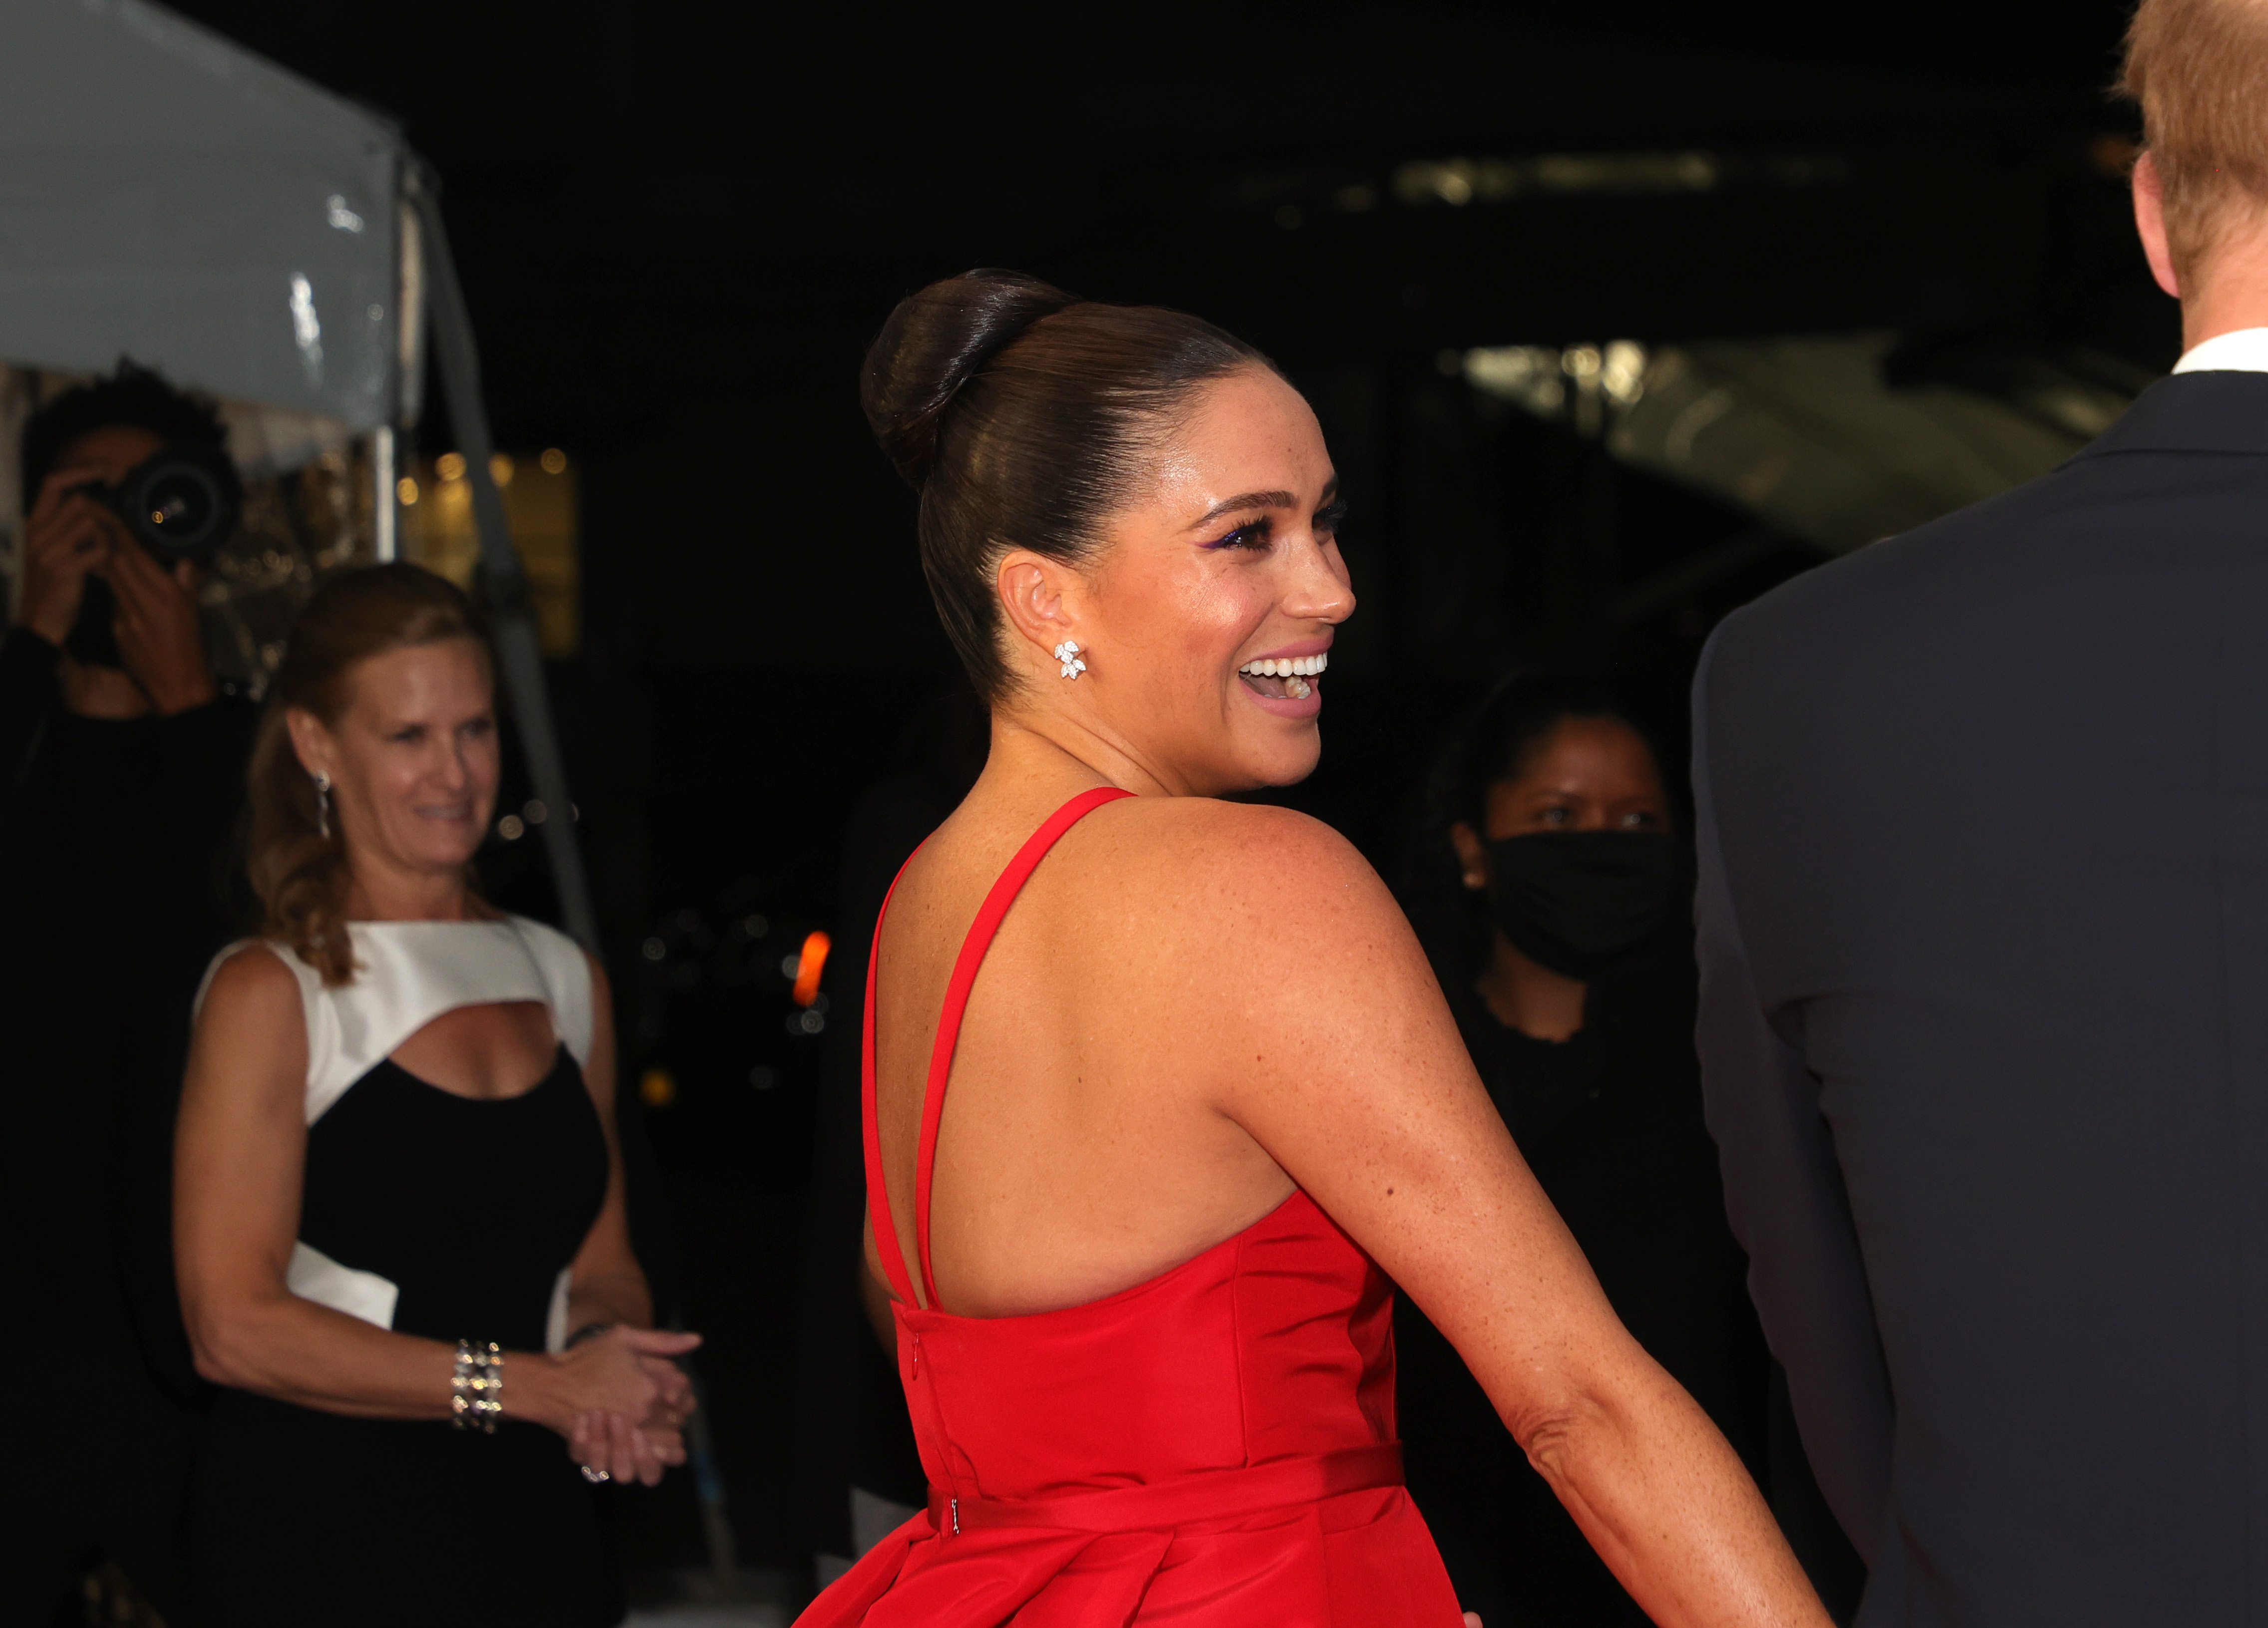 NEW YORK, NEW YORK - NOVEMBER 10: Meghan, Duchess of Sussex attends the 2021 Salute To Freedom Gala at Intrepid Sea-Air-Space Museum on November 10, 2021 in New York City. (Photo by Dia Dipasupil/Getty Images)